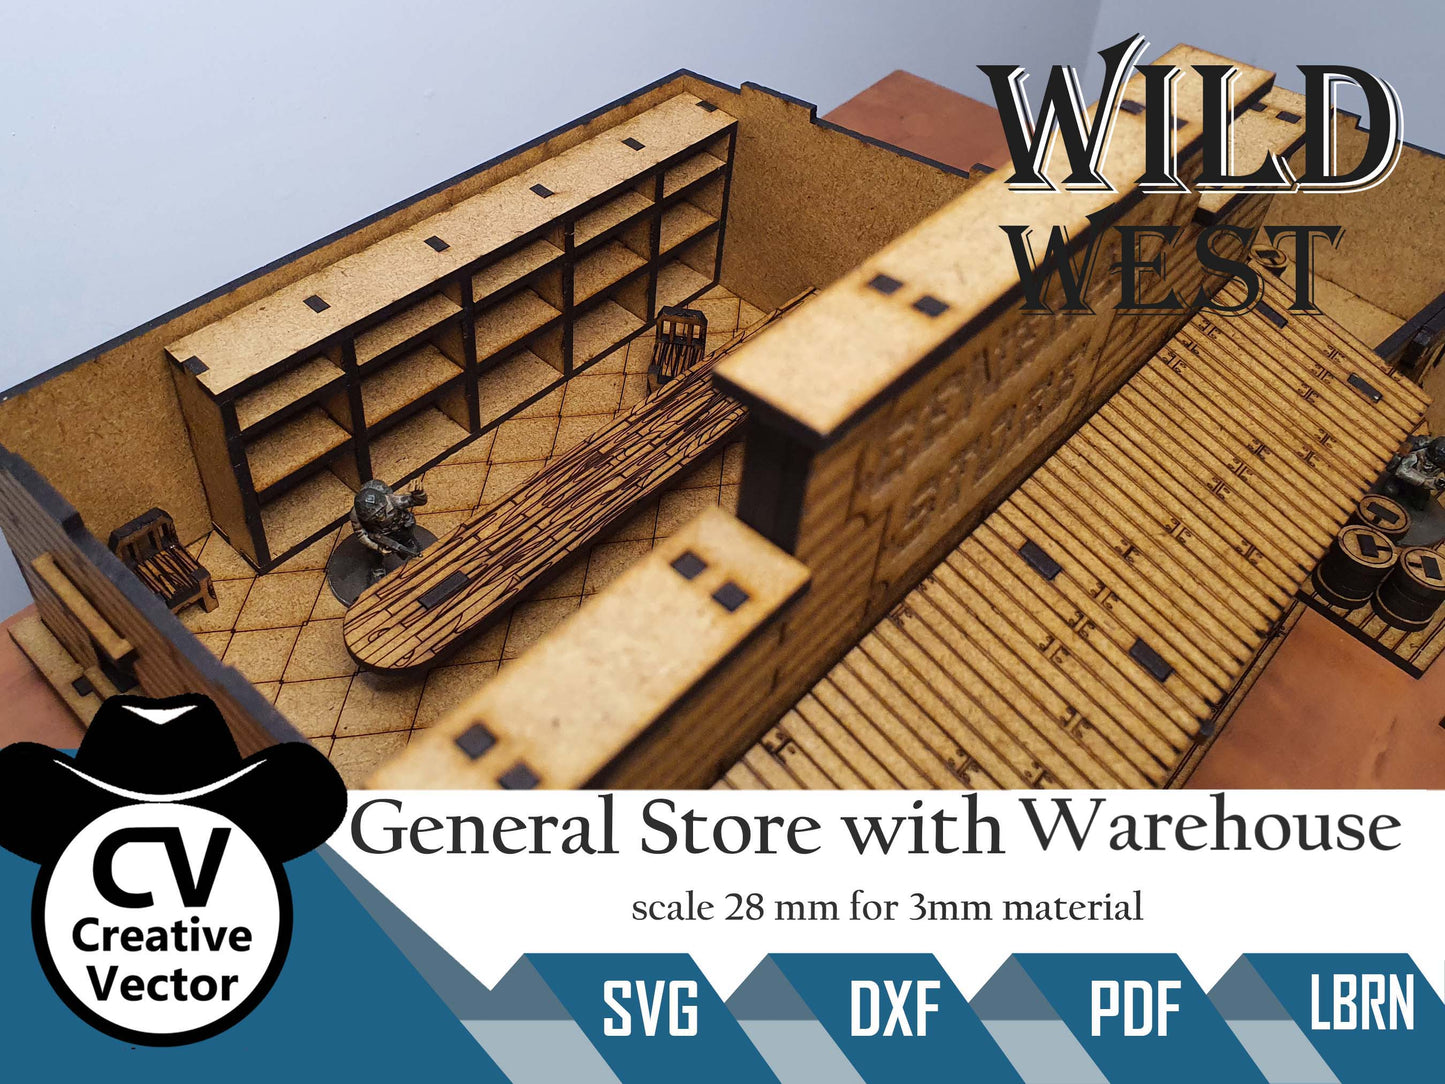 Wild West General Store with Warehouse in scale 28mm for Wargamers